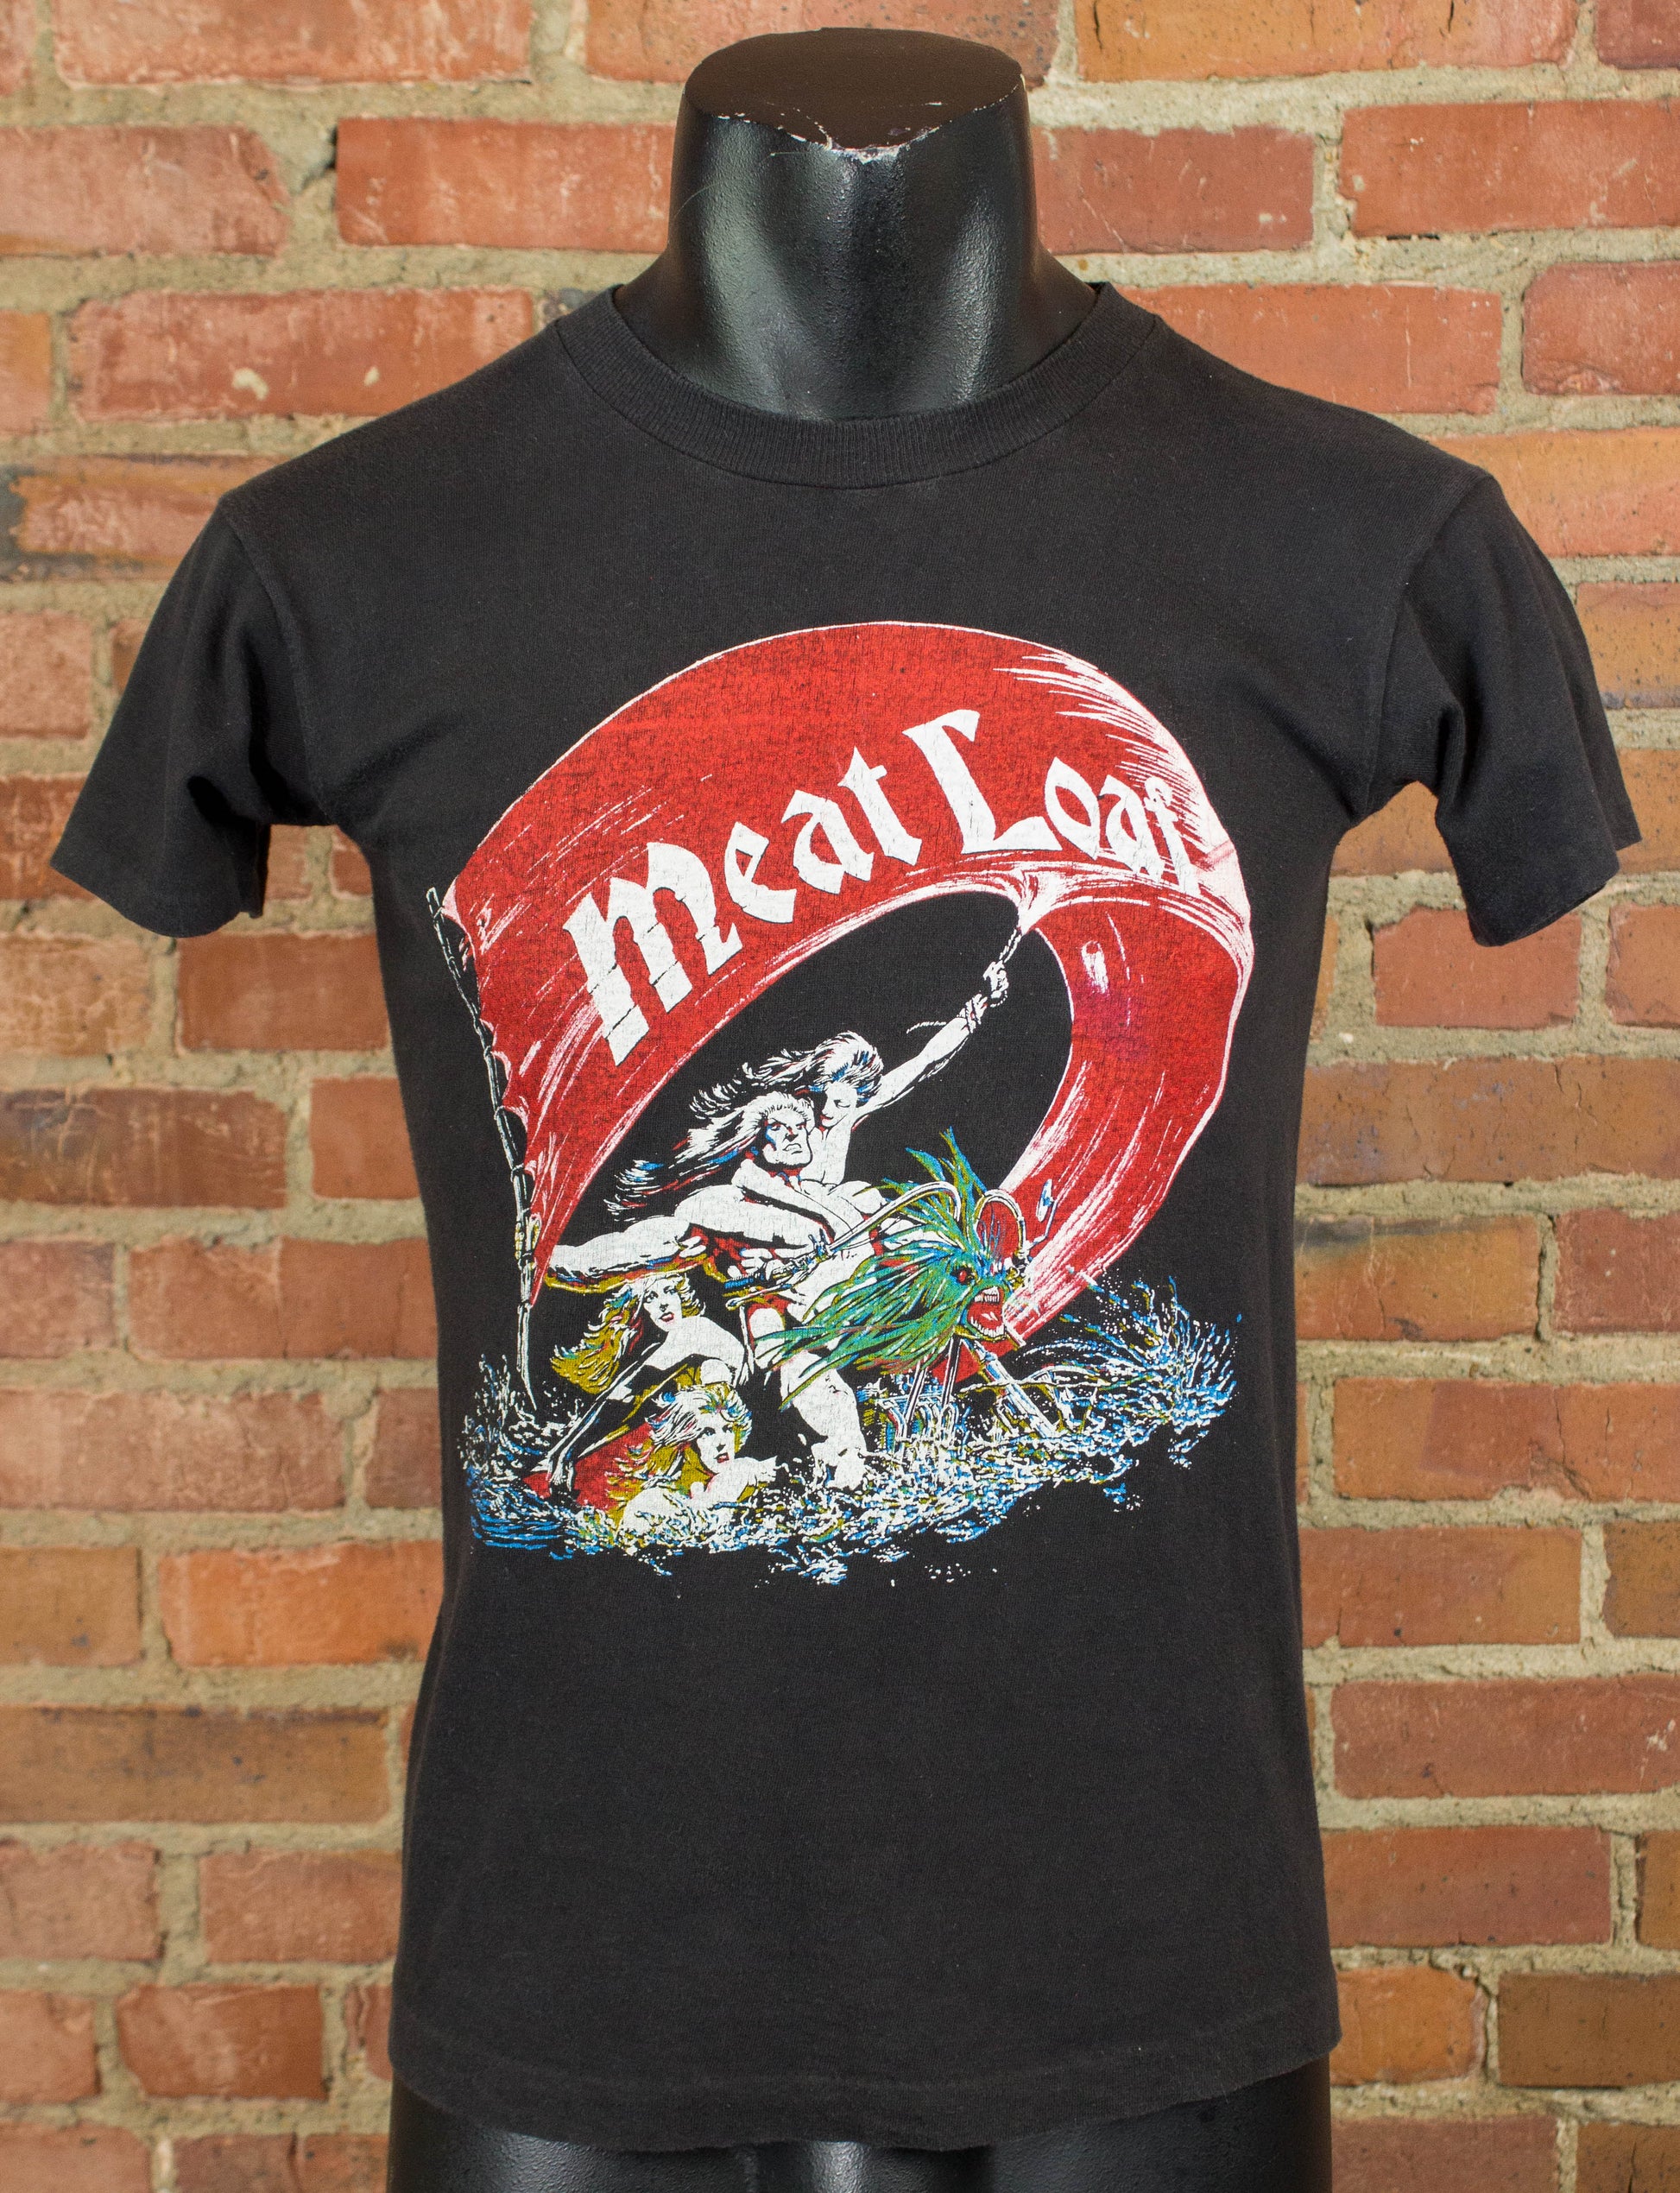 Vintage Meatloaf Concert T Shirt 70s Parking Lot Bootleg Black and Red Small